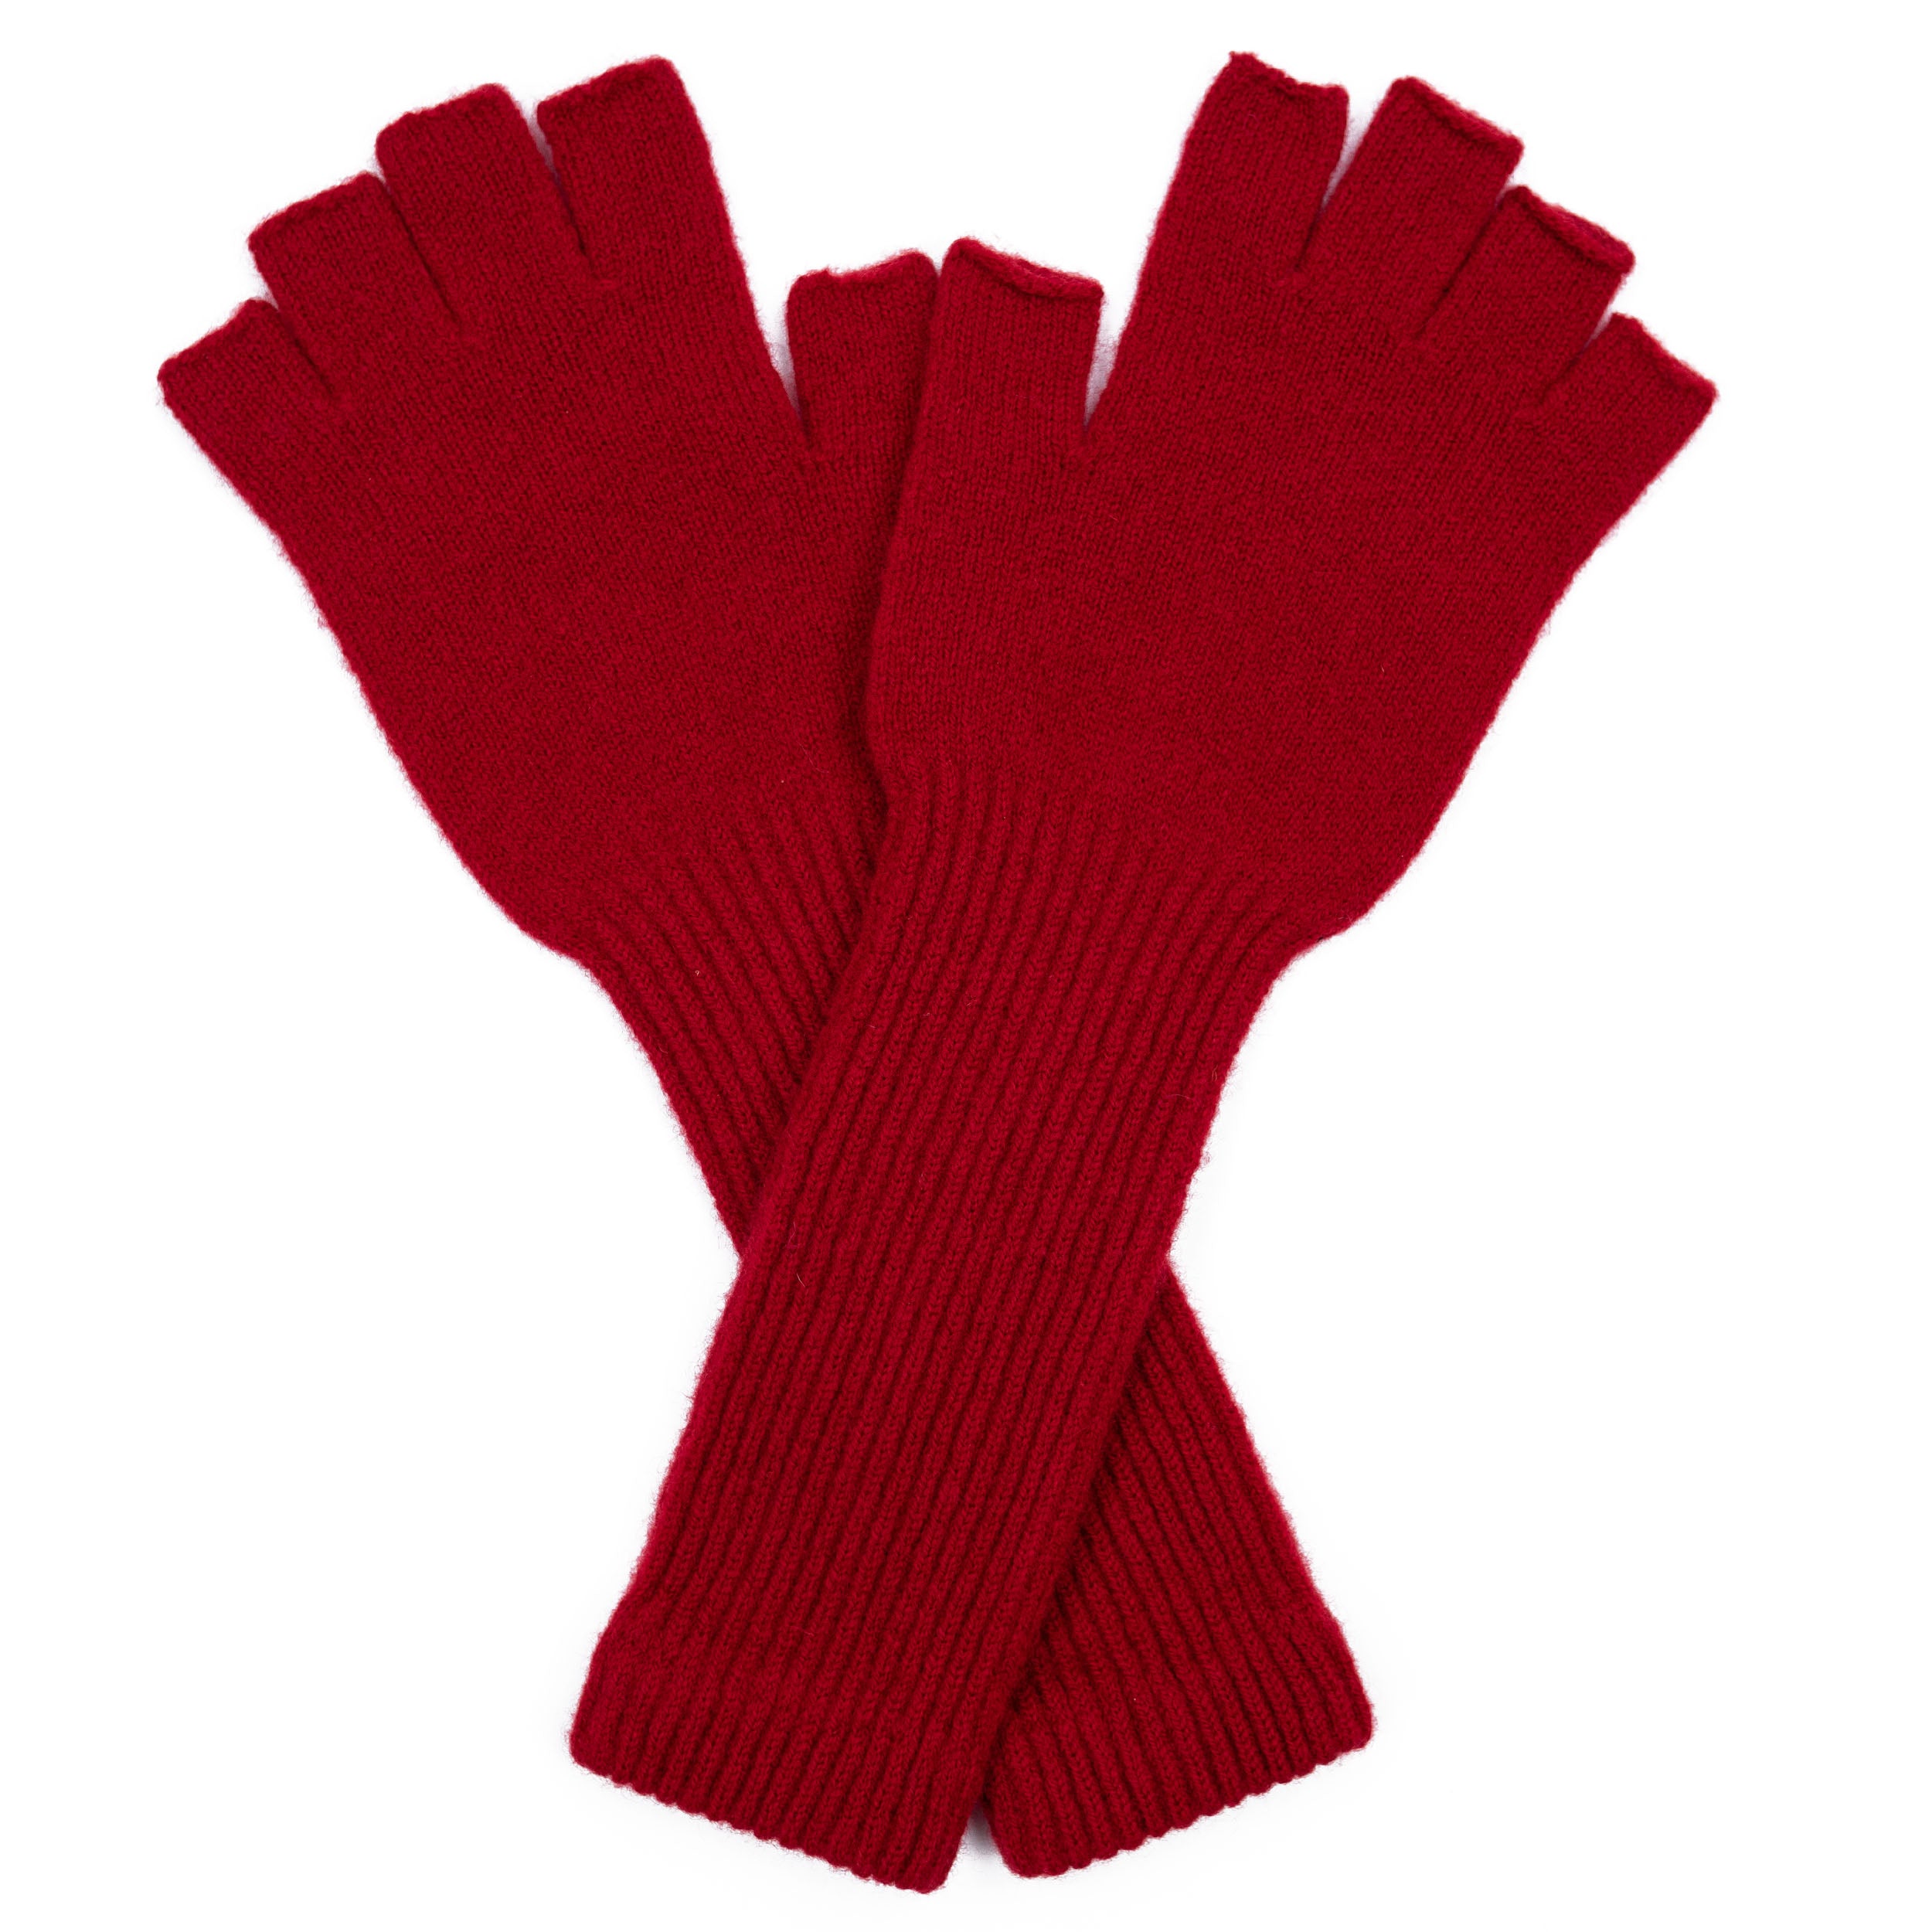 Carrier Company Gathering Glove in Red